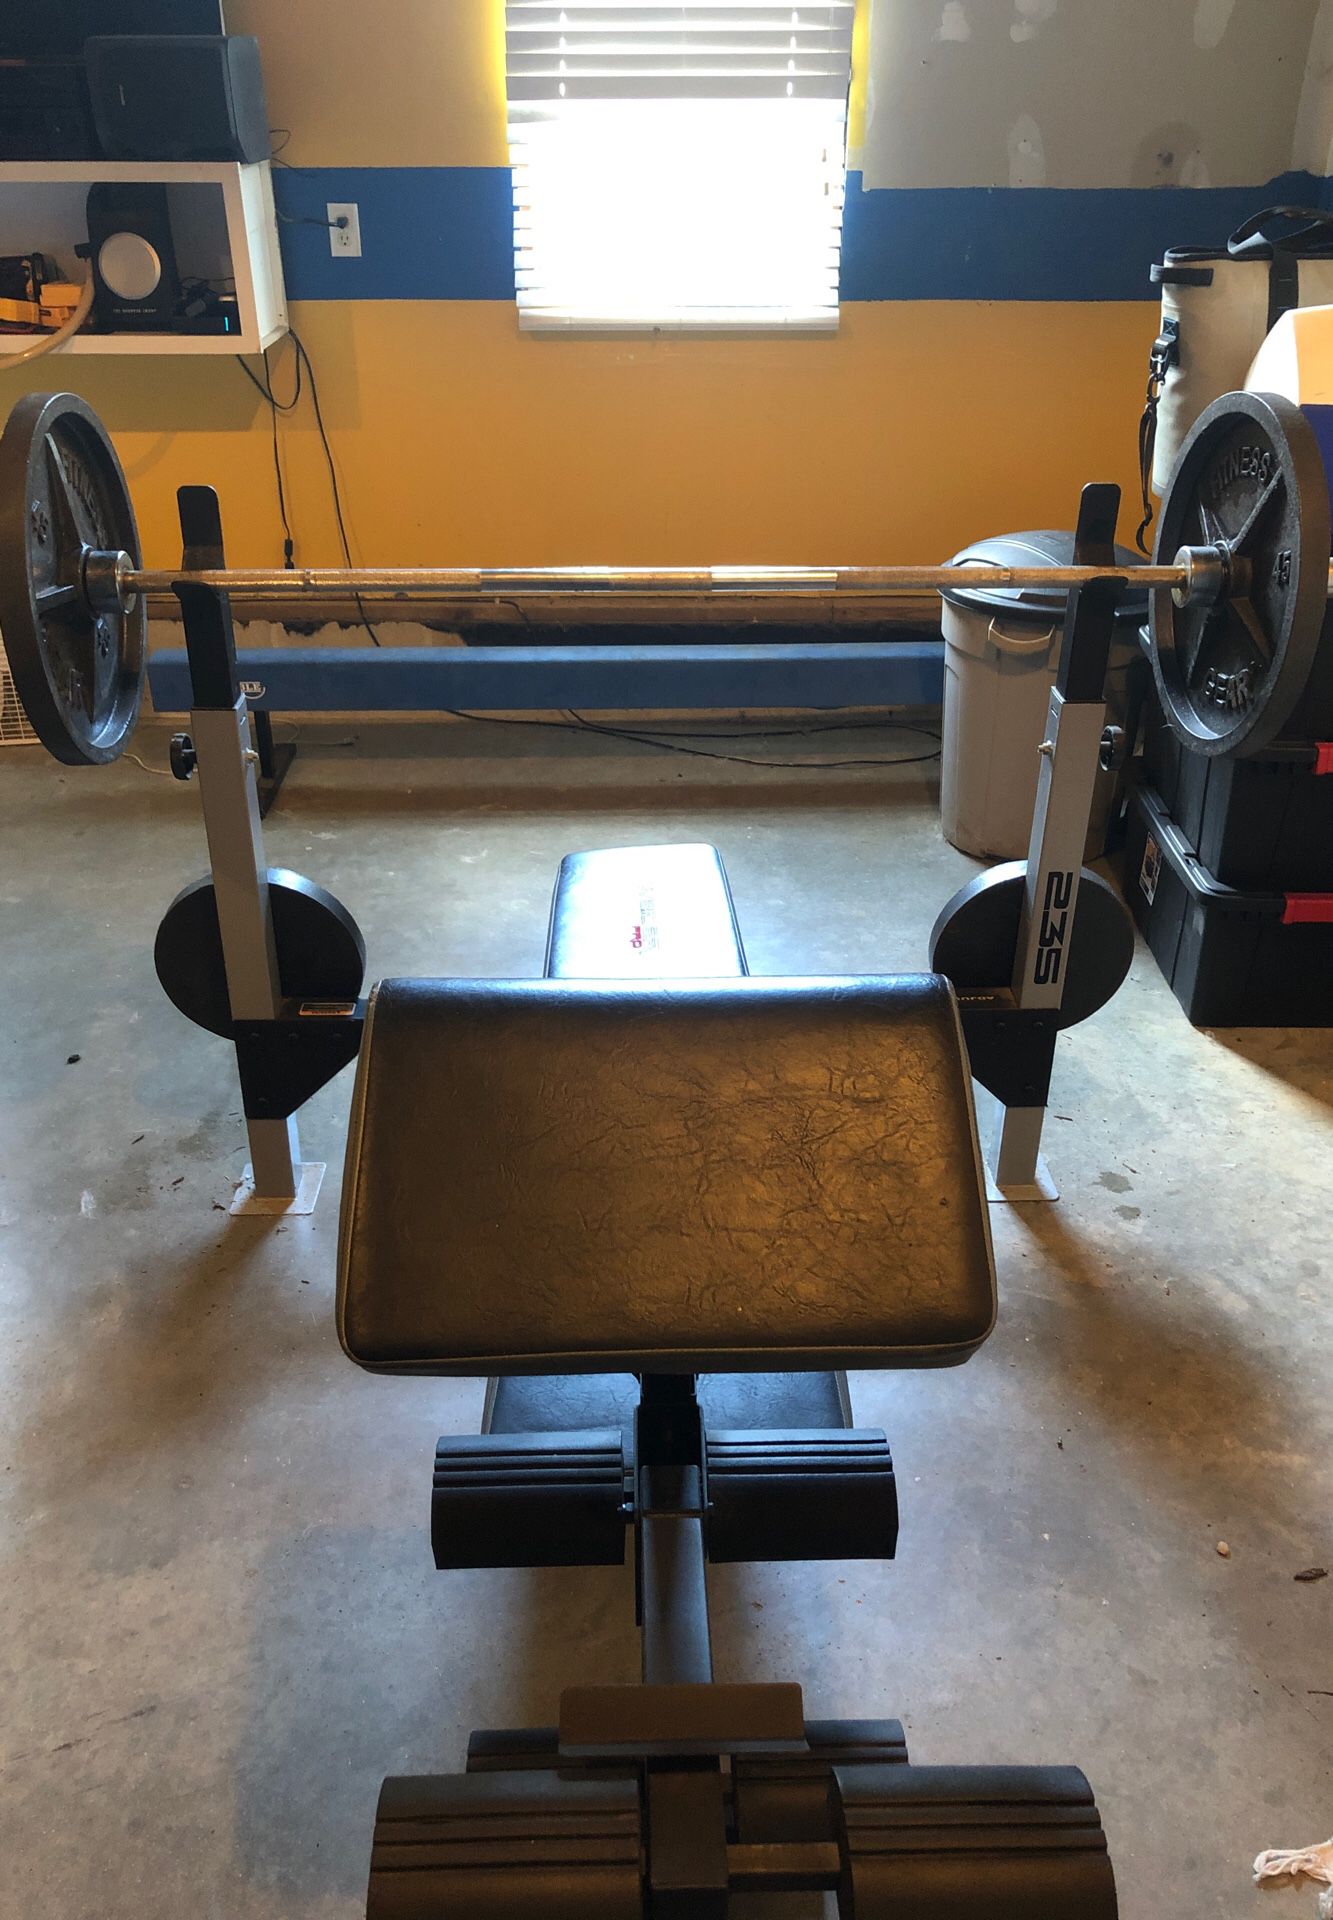 Weight Bench and weights